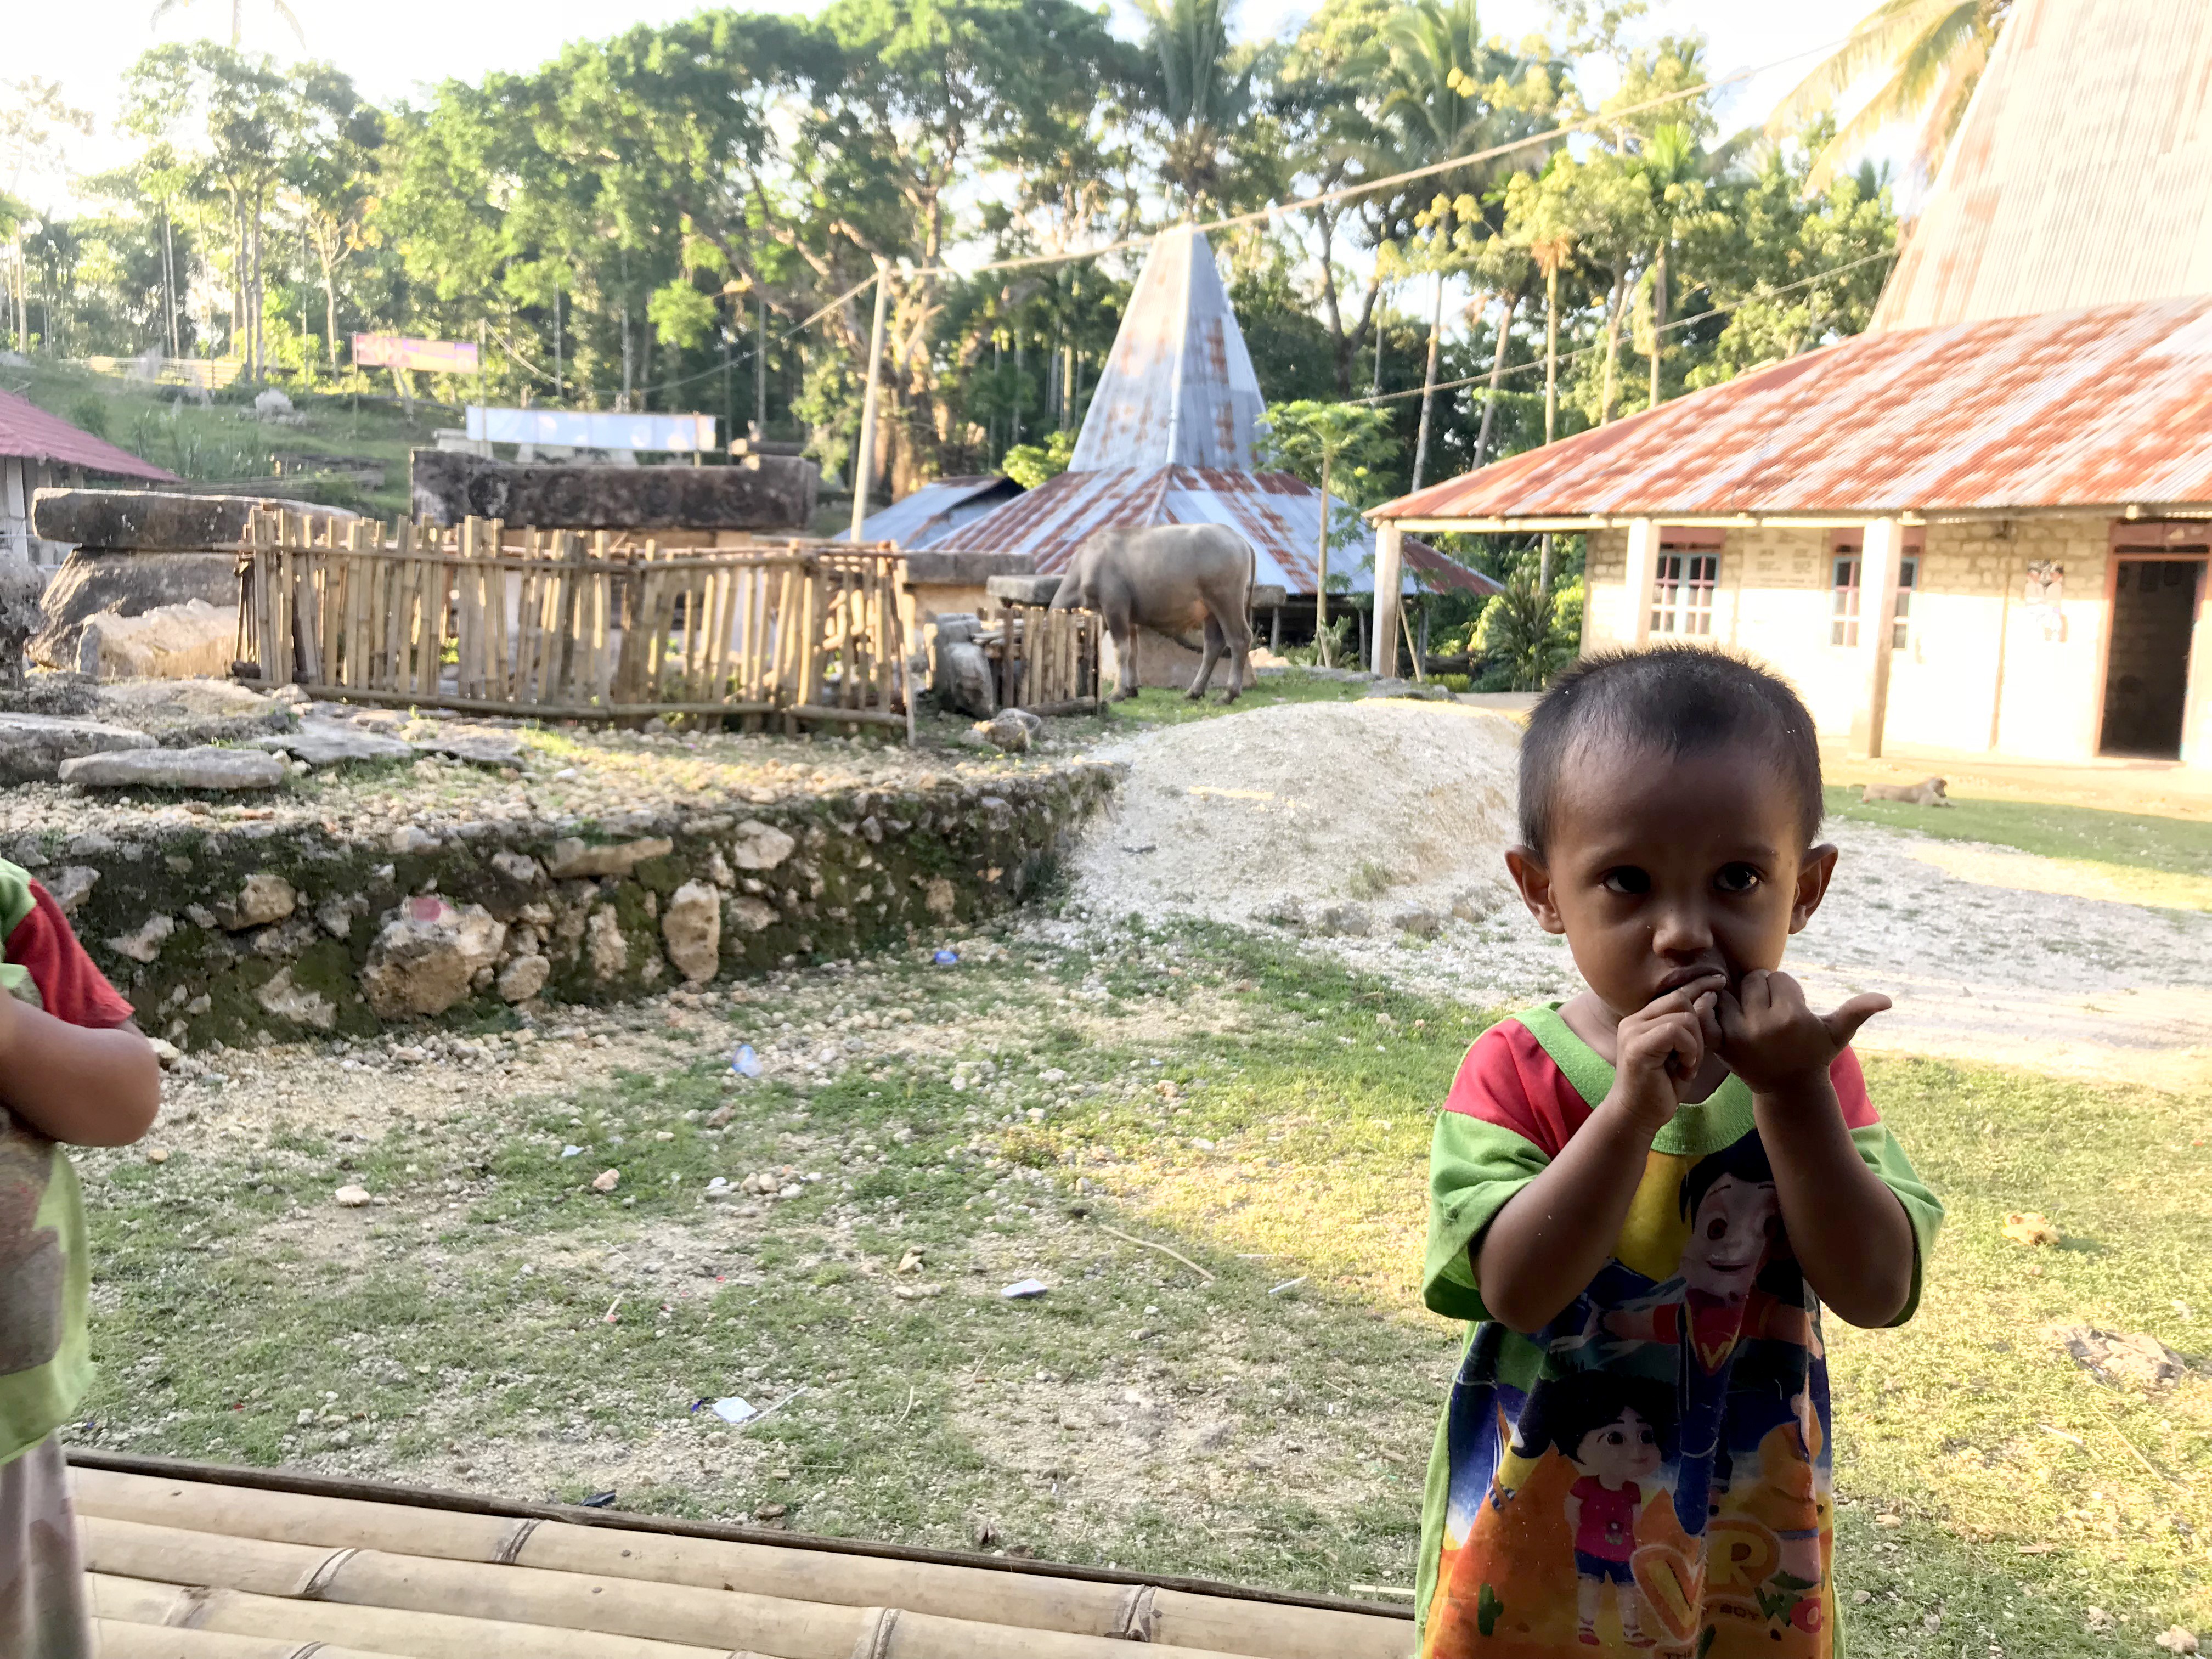 With only dangerous oil maps for illumination at night, children who live in Weepatando village in Southwest Sumba are finding it hard to excel due to poor lighting at their houses. Photo: Resty Woro Yuniar